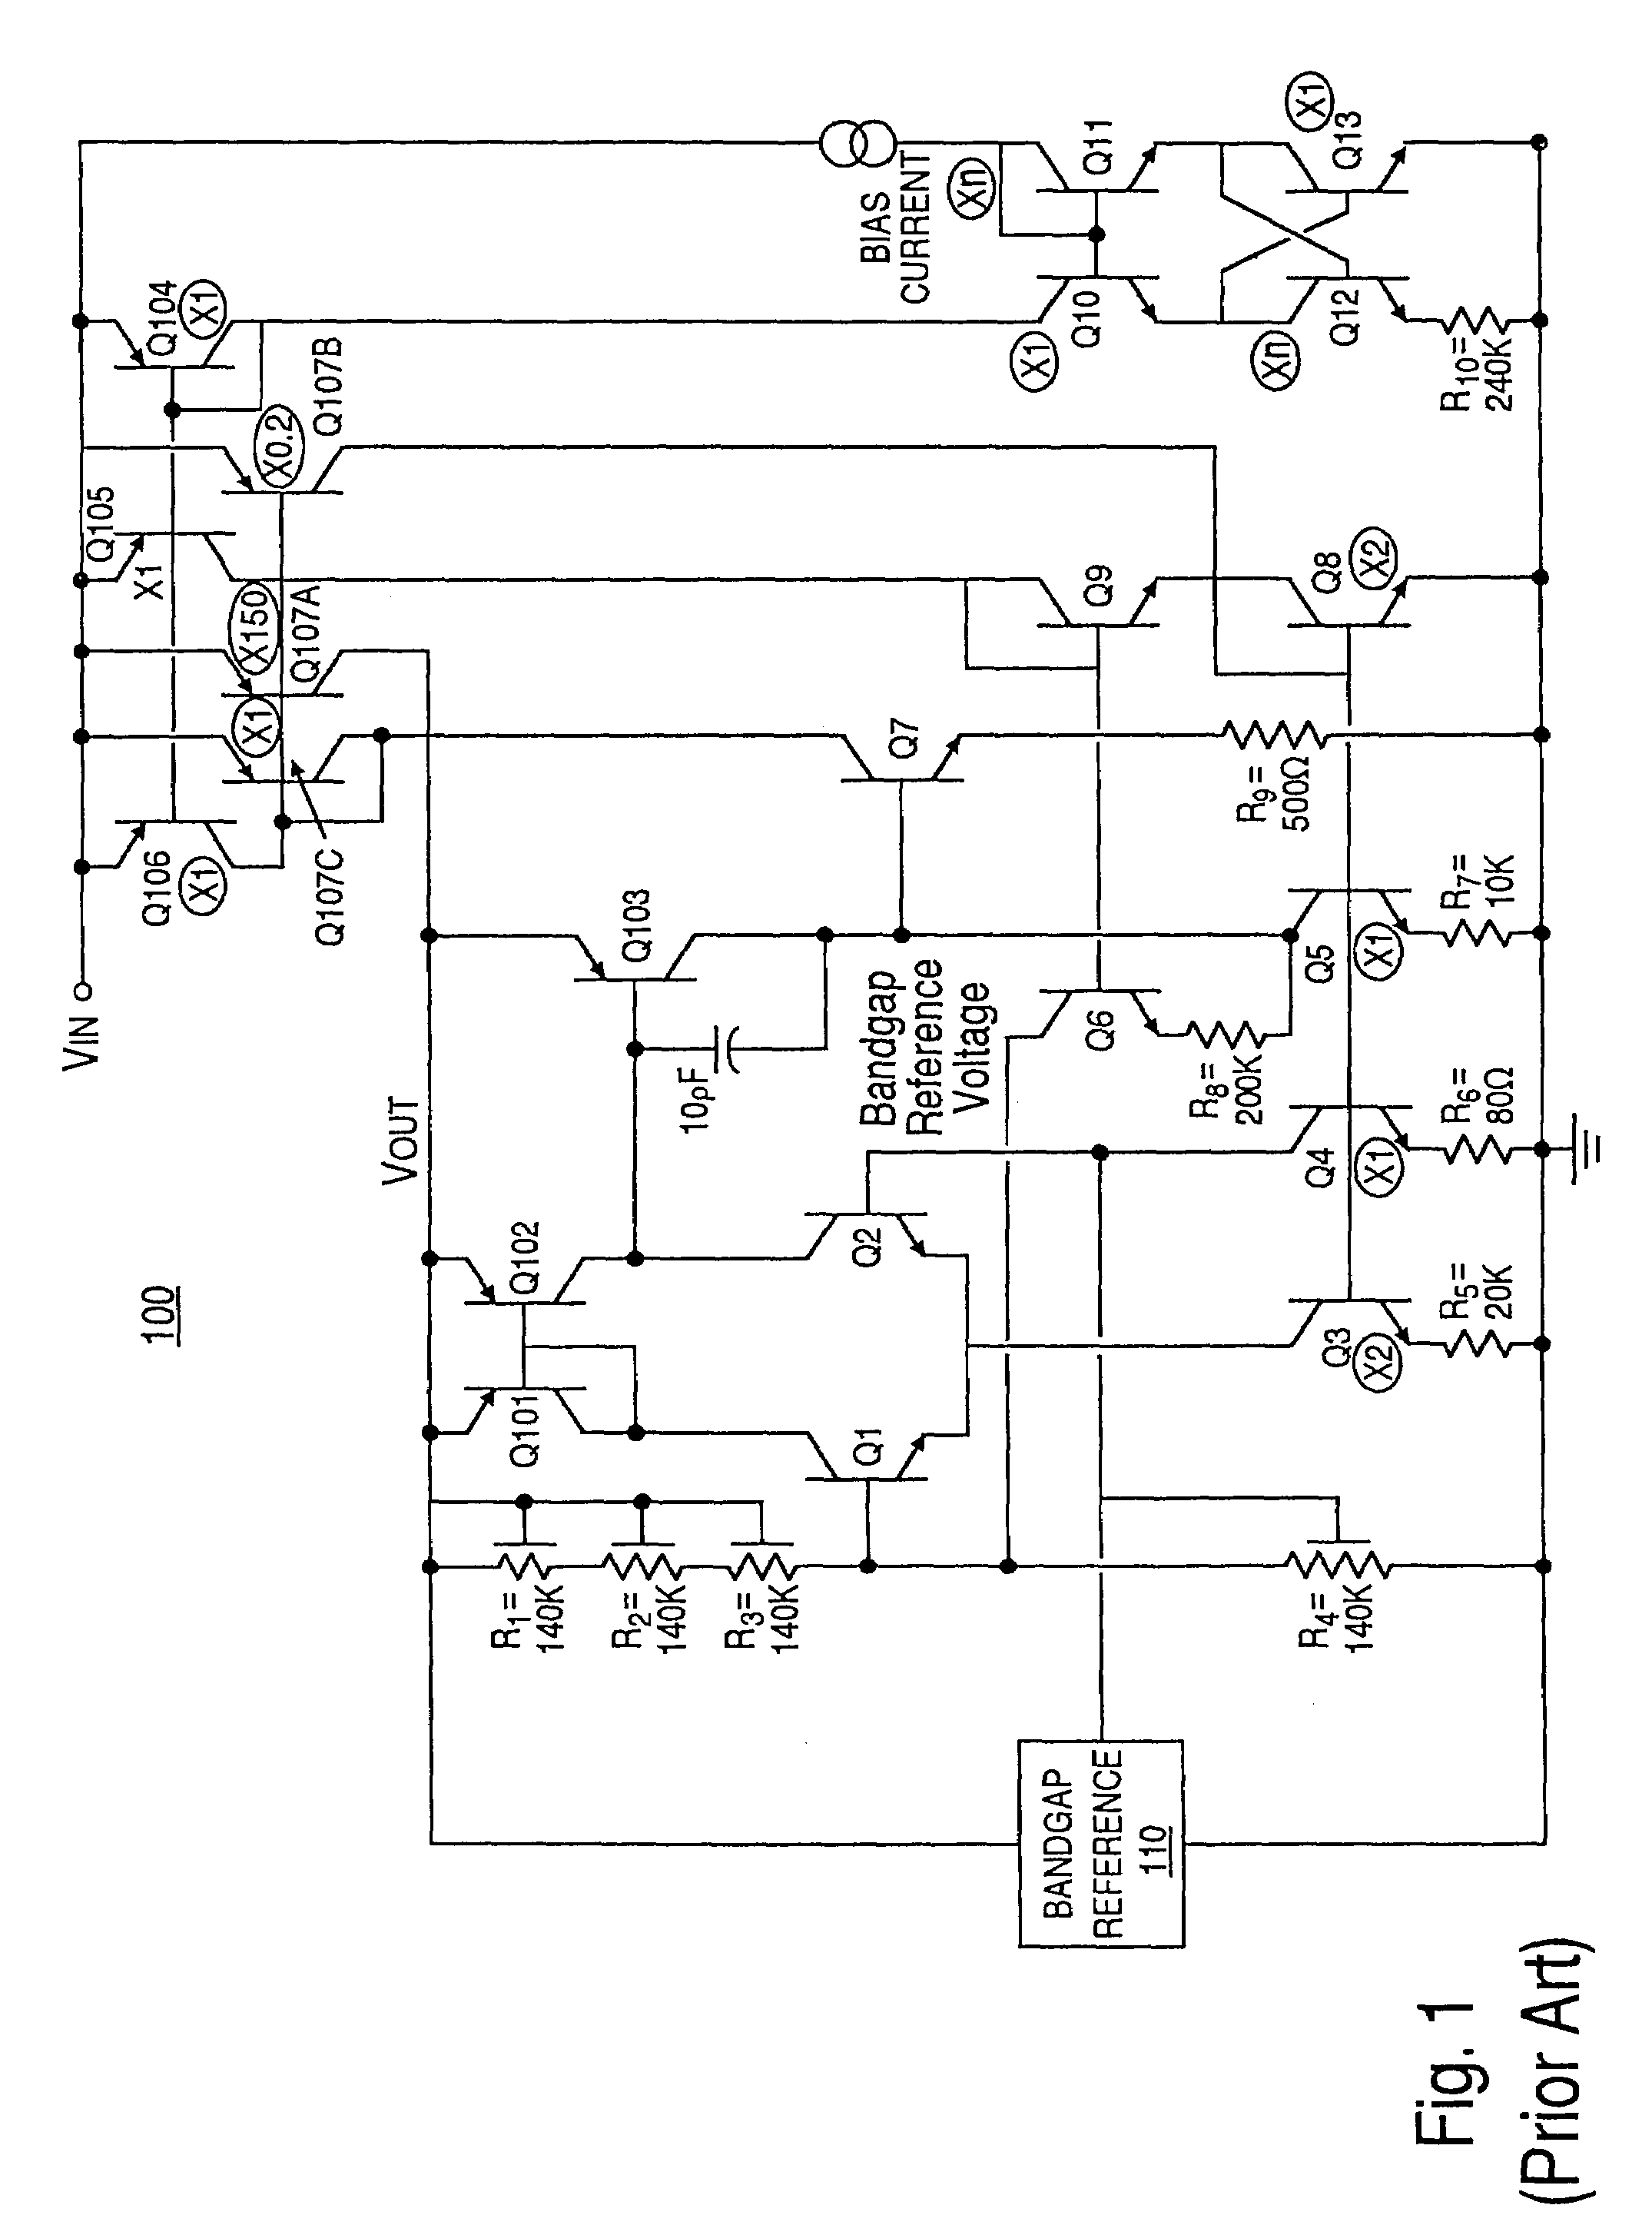 Difference amplifier for regulating voltage